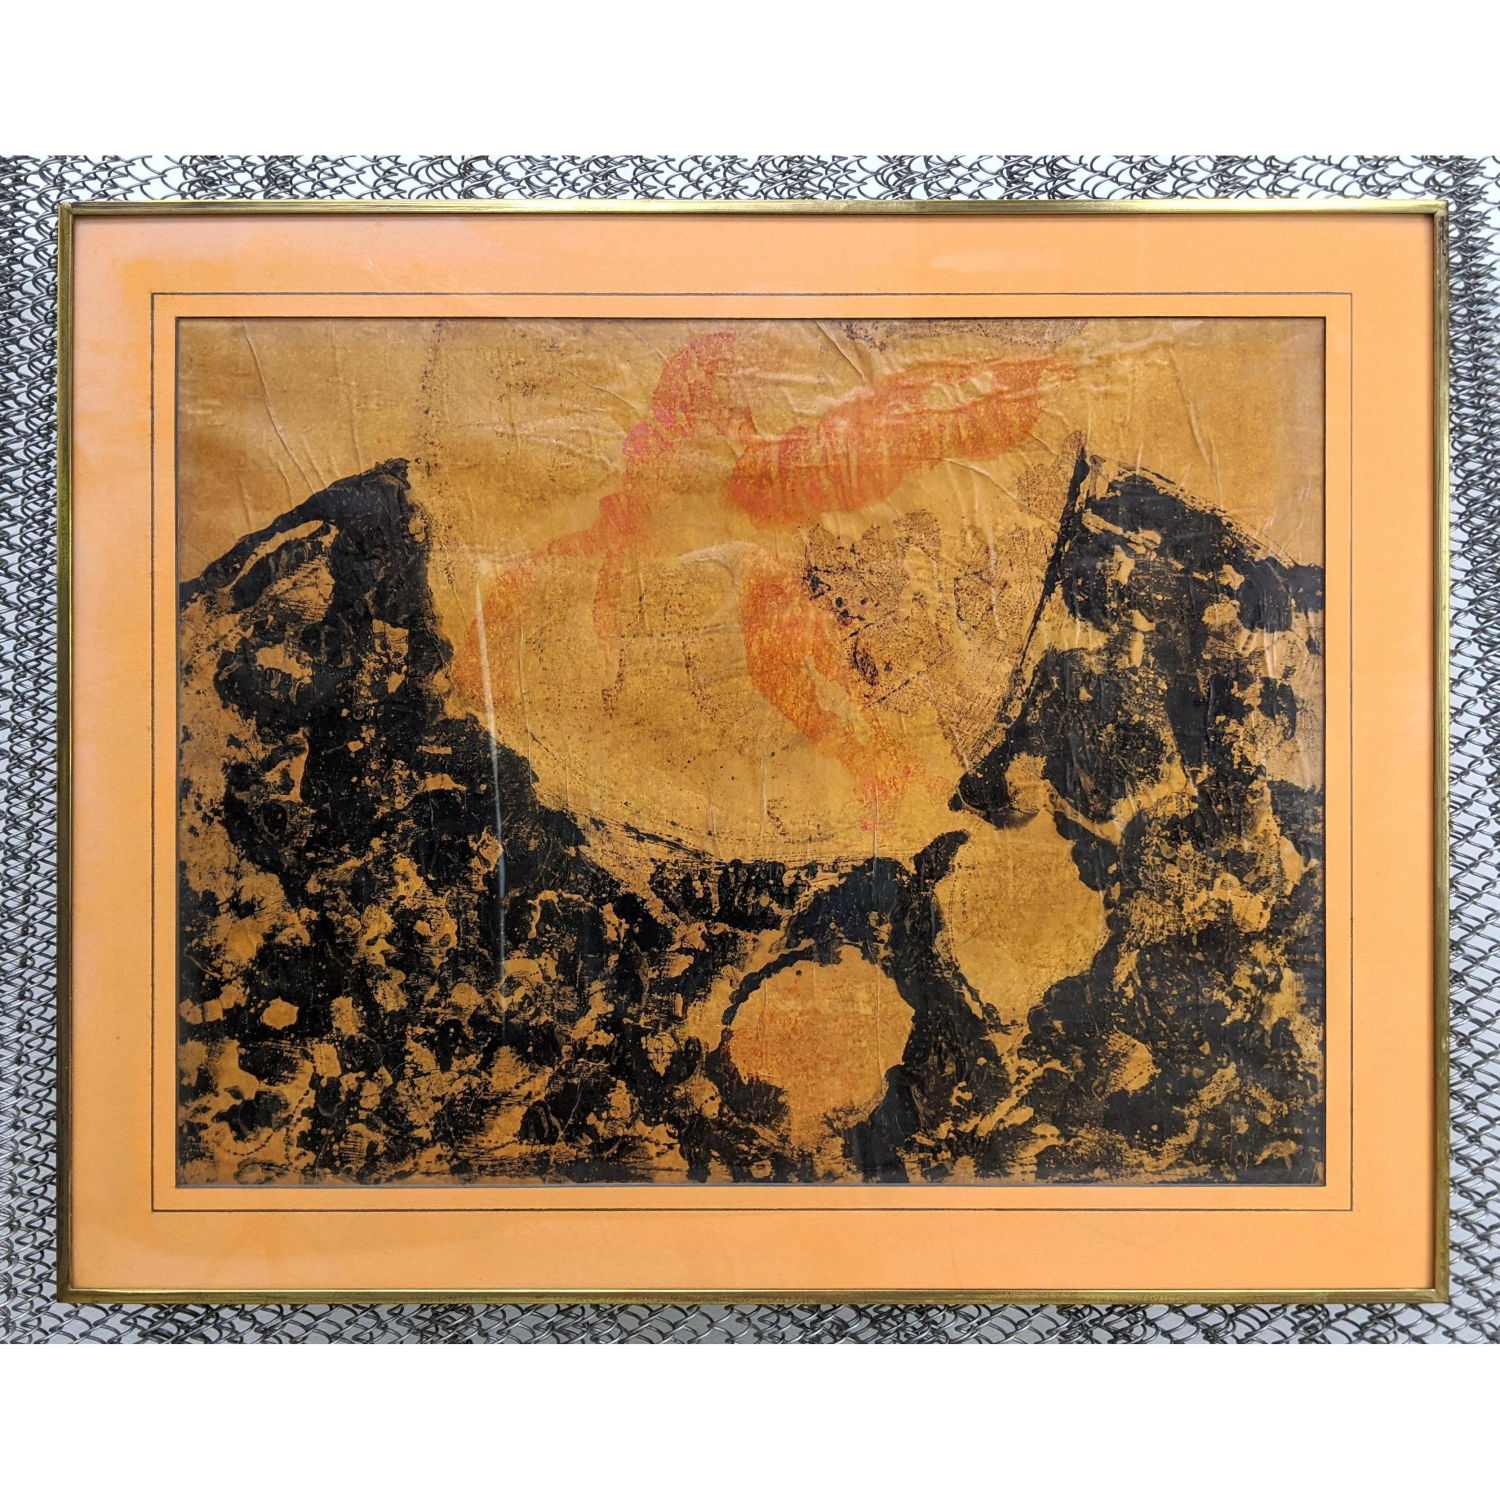 GEORGE D AMATO Abstract Mixed Media 2b8a28